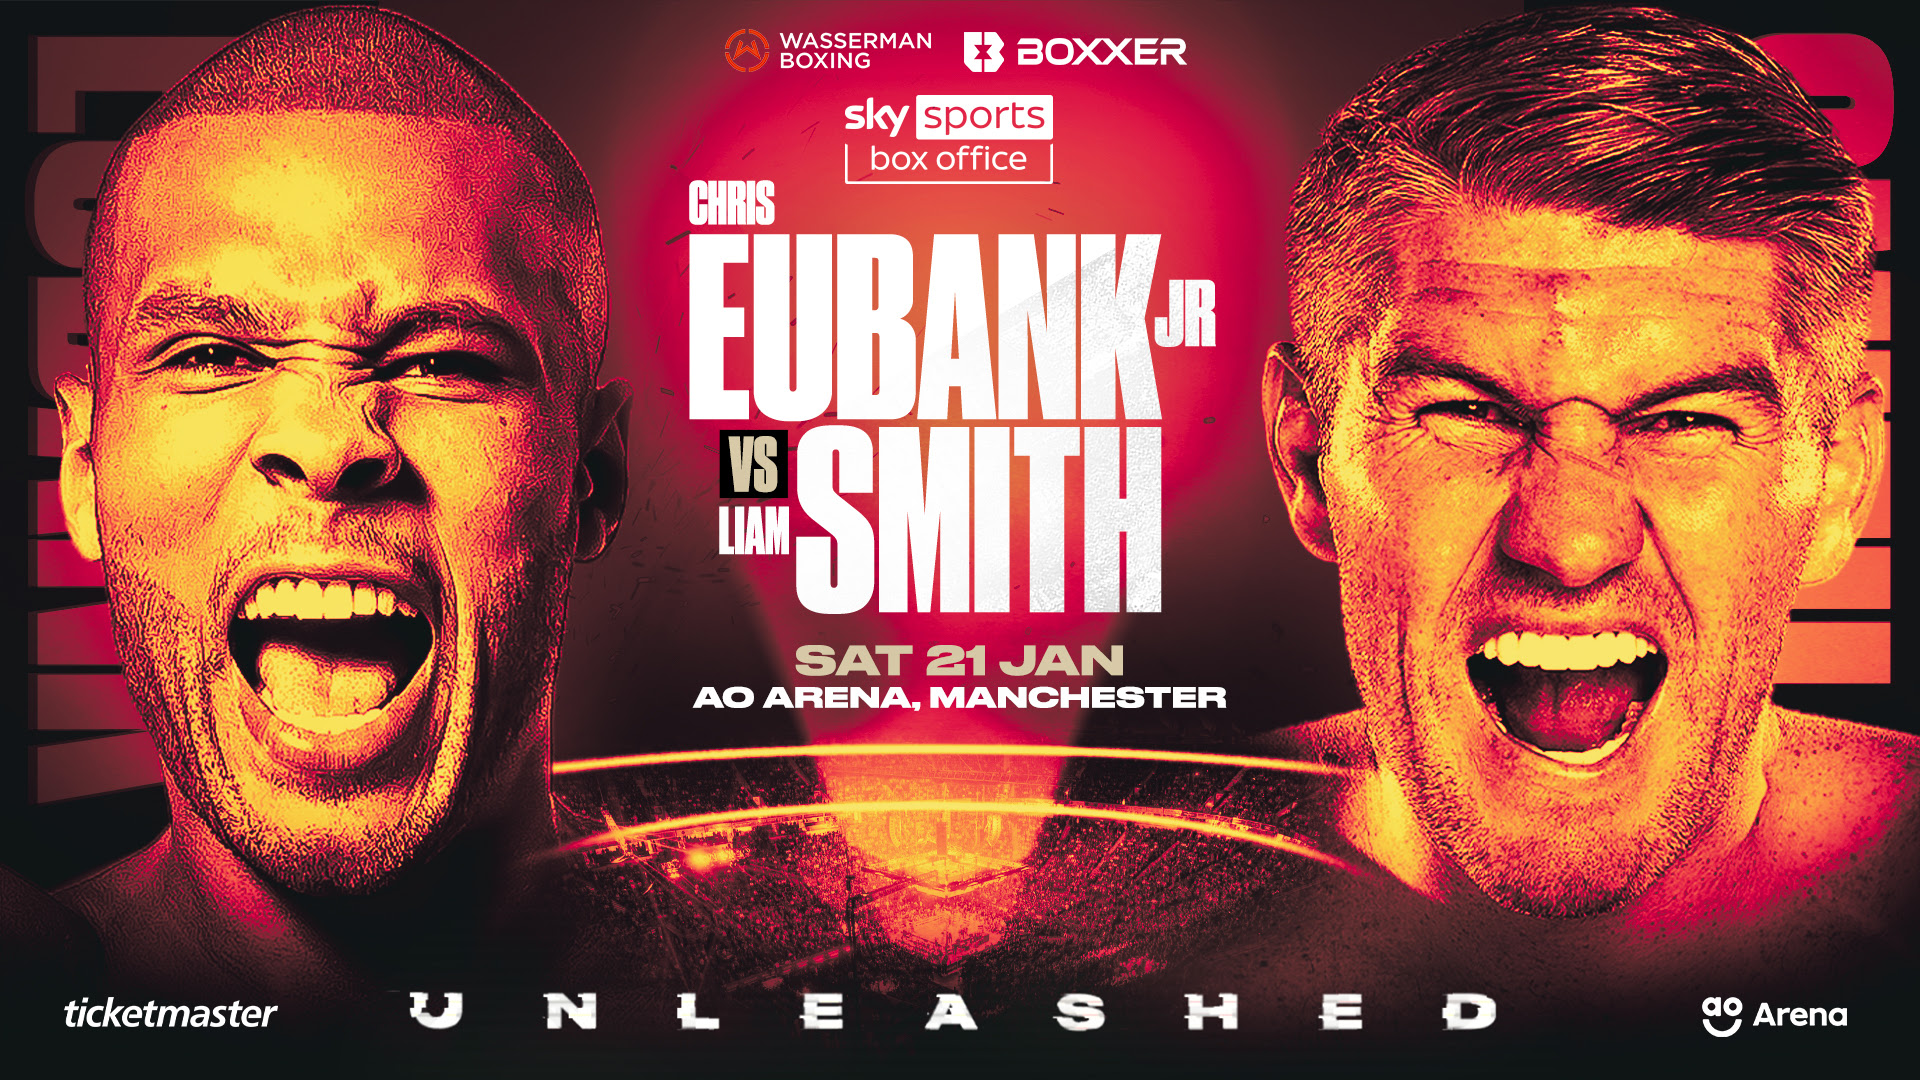 Boxing schedule: Boxing News: Which boxers are competing this weekend? Chris Eubank Jr vs Liam Smith, Sean Hemphill vs David Stevens, Tarver Jr vs Dwelly